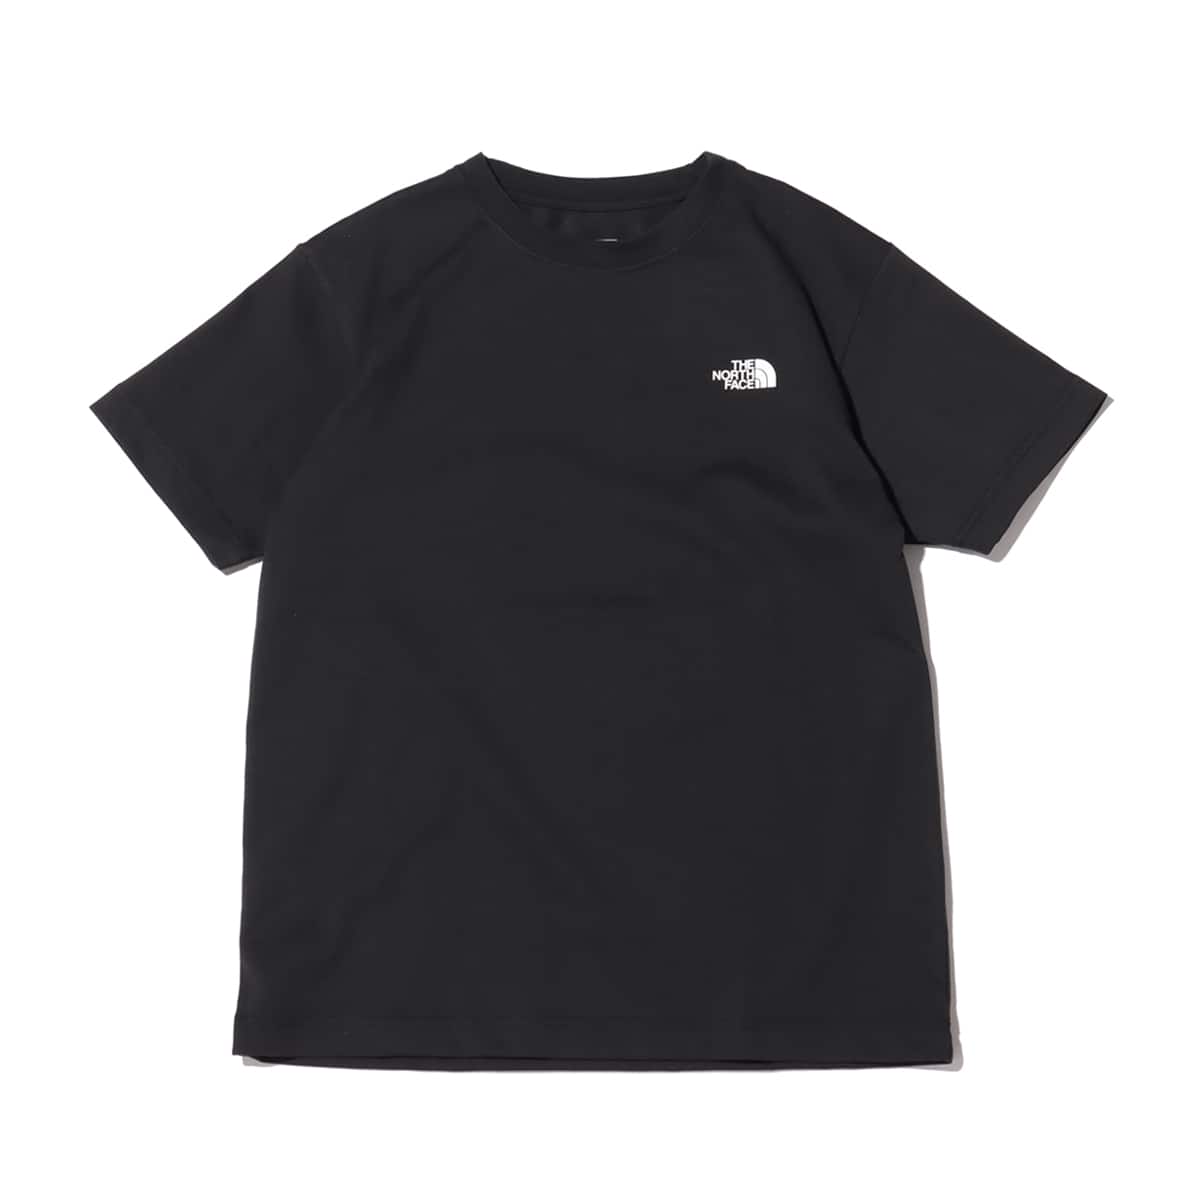 THE NORTH FACE S/S BACK SQUARE LOGO TEE BLACK 22SS-I